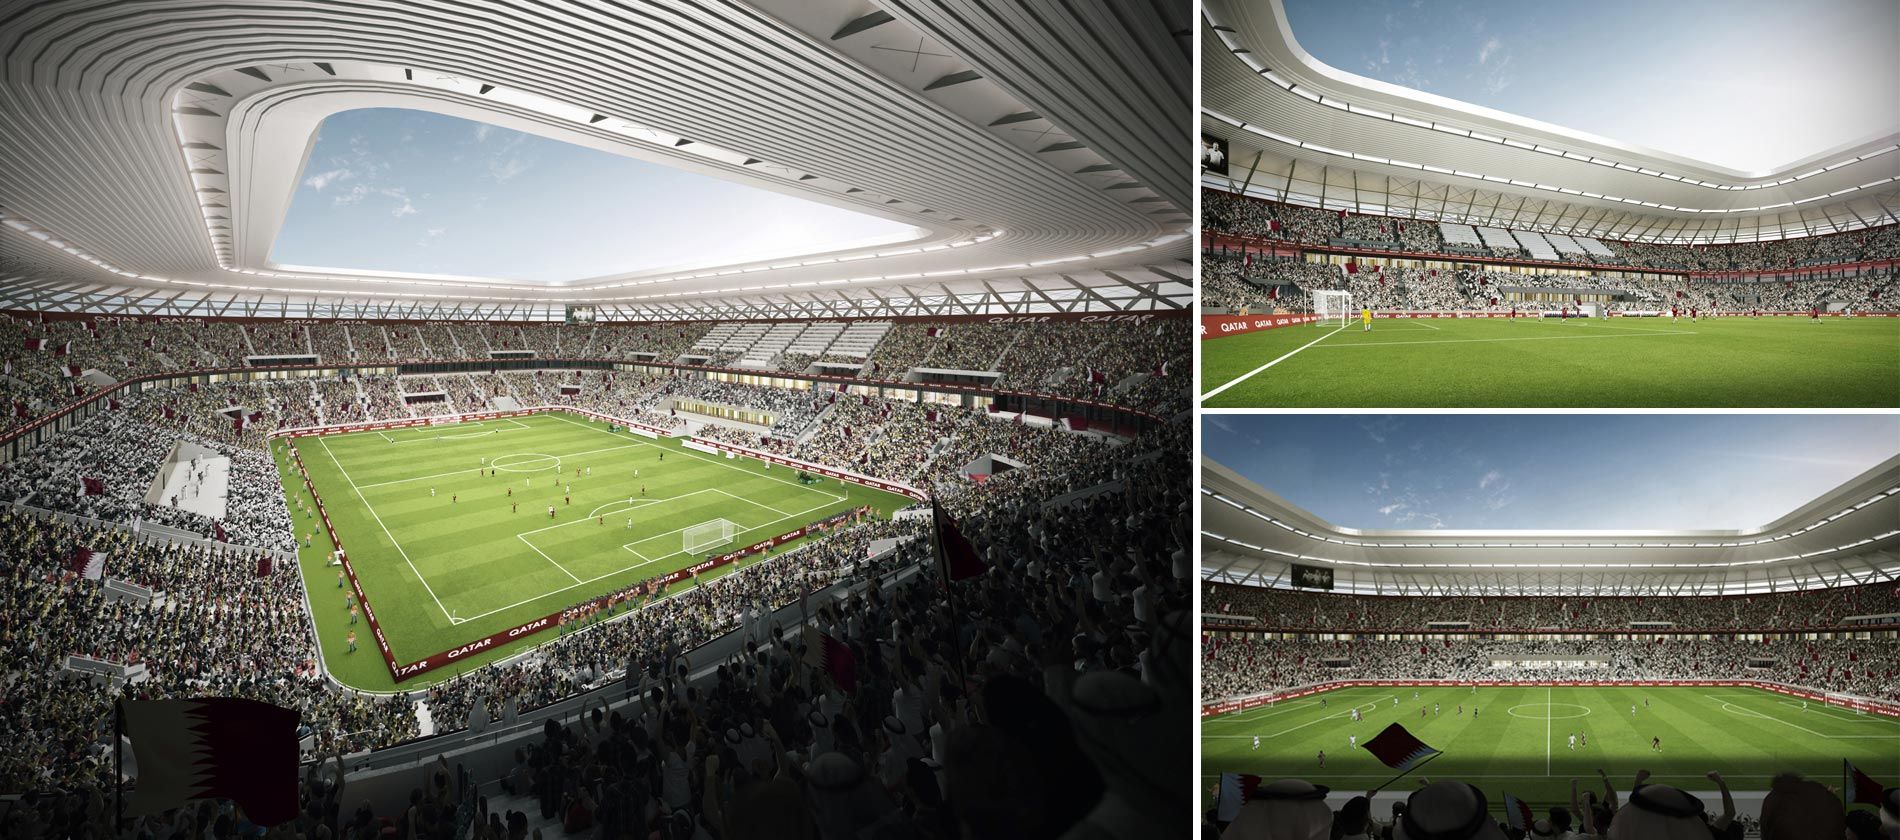 The interior is indistinguishable compared to conventional stadiums